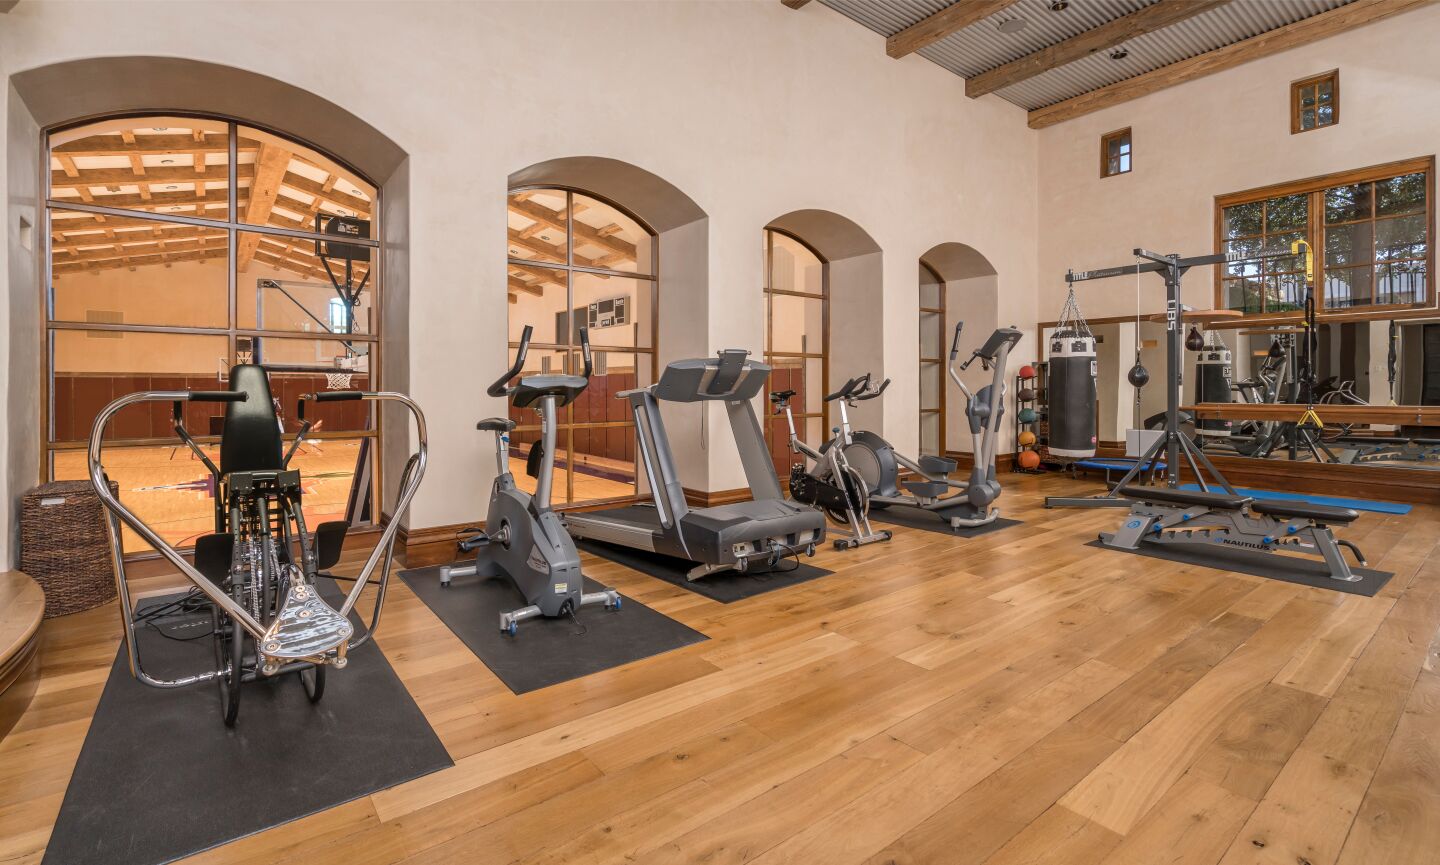 The gym with various kinds of exercise equipment.